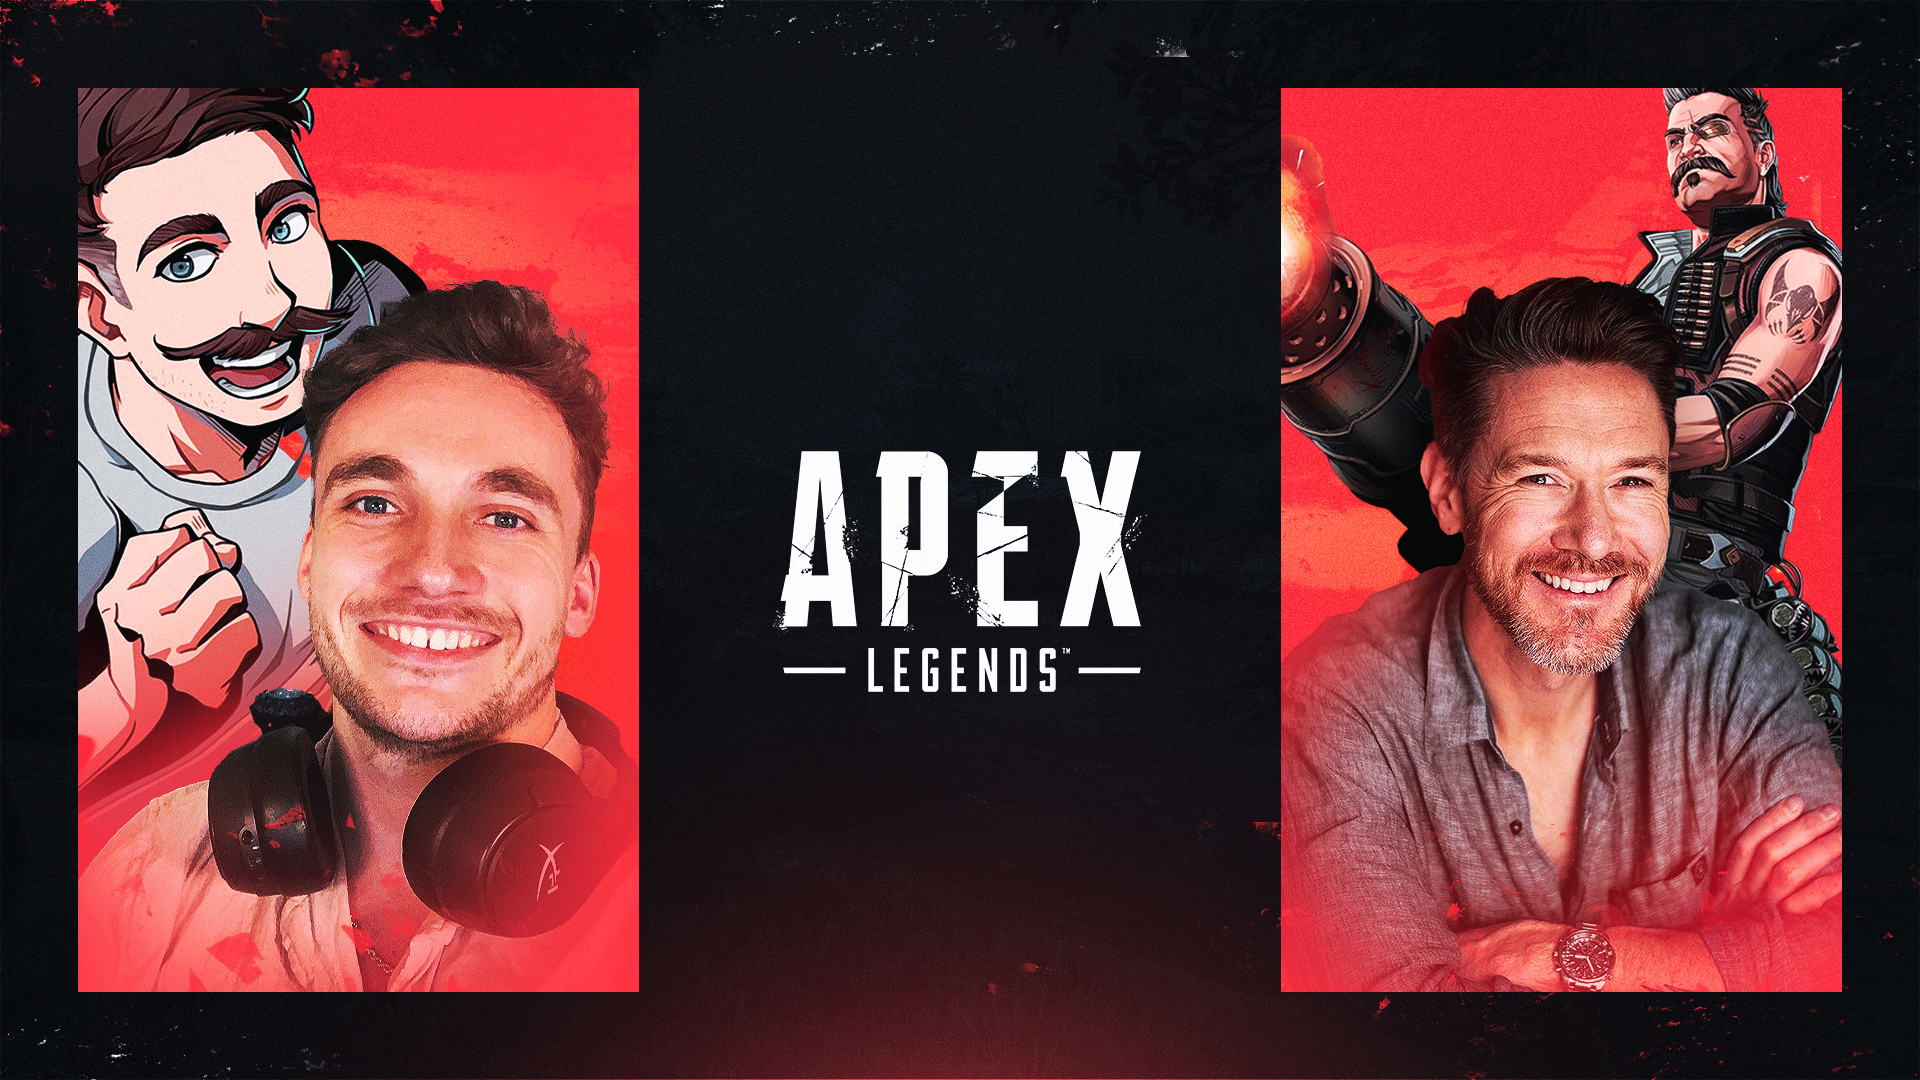 Cross-Platform Launch Unites Gamers – Crayator and Ben Prendergast Celebrate Apex Legends Arrival On Nintendo Switch With An Epic Live Broadcast